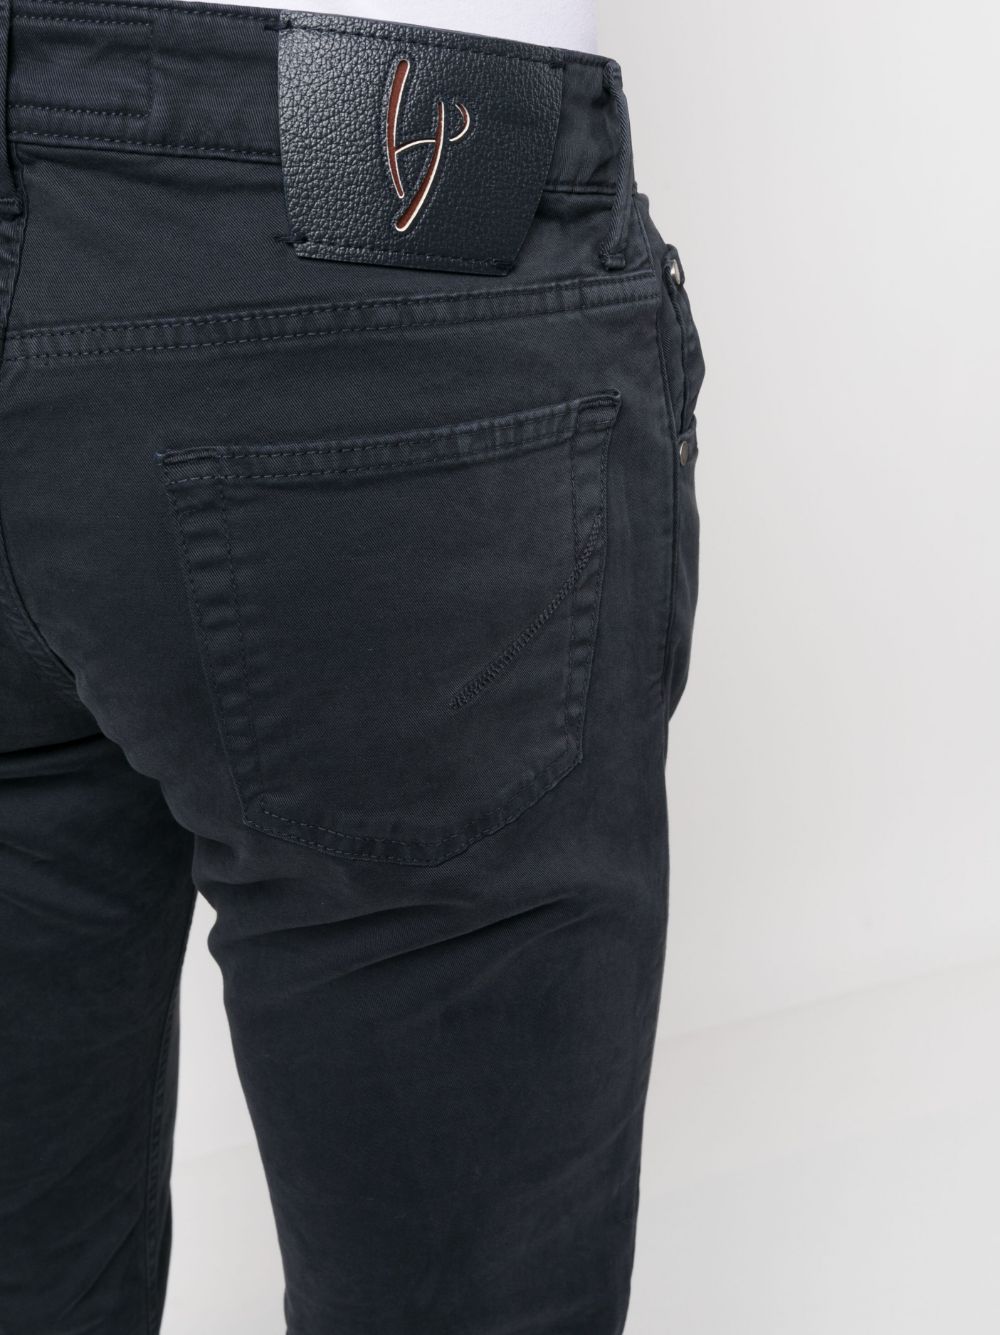 Hand Picked HAND PICKED- Orvieto Jeans